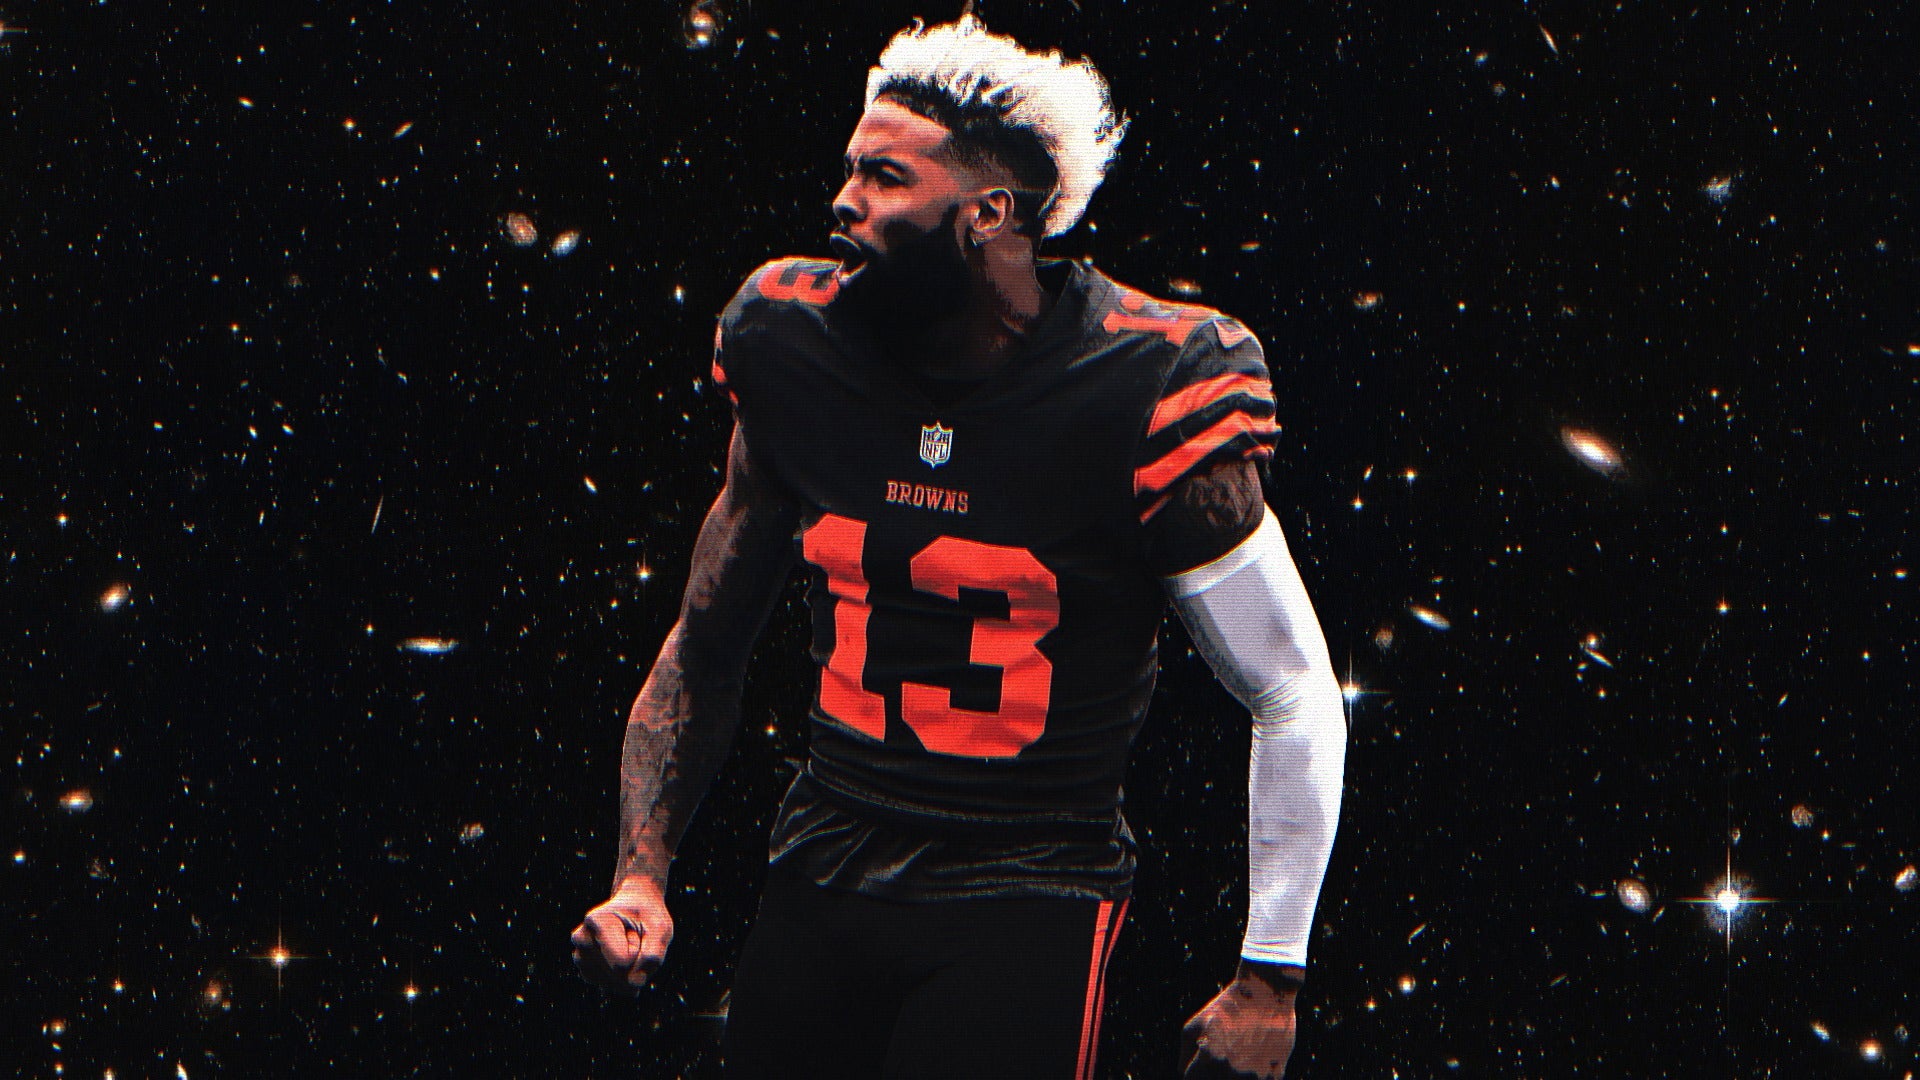 Chi In Da Stu on Twitter HERE IS THE OBJ WALLPAPER I MADE FOR Scomo843   RT AND FEEDBACK APPRECIATED httptcoYXHlcQPCR1  X